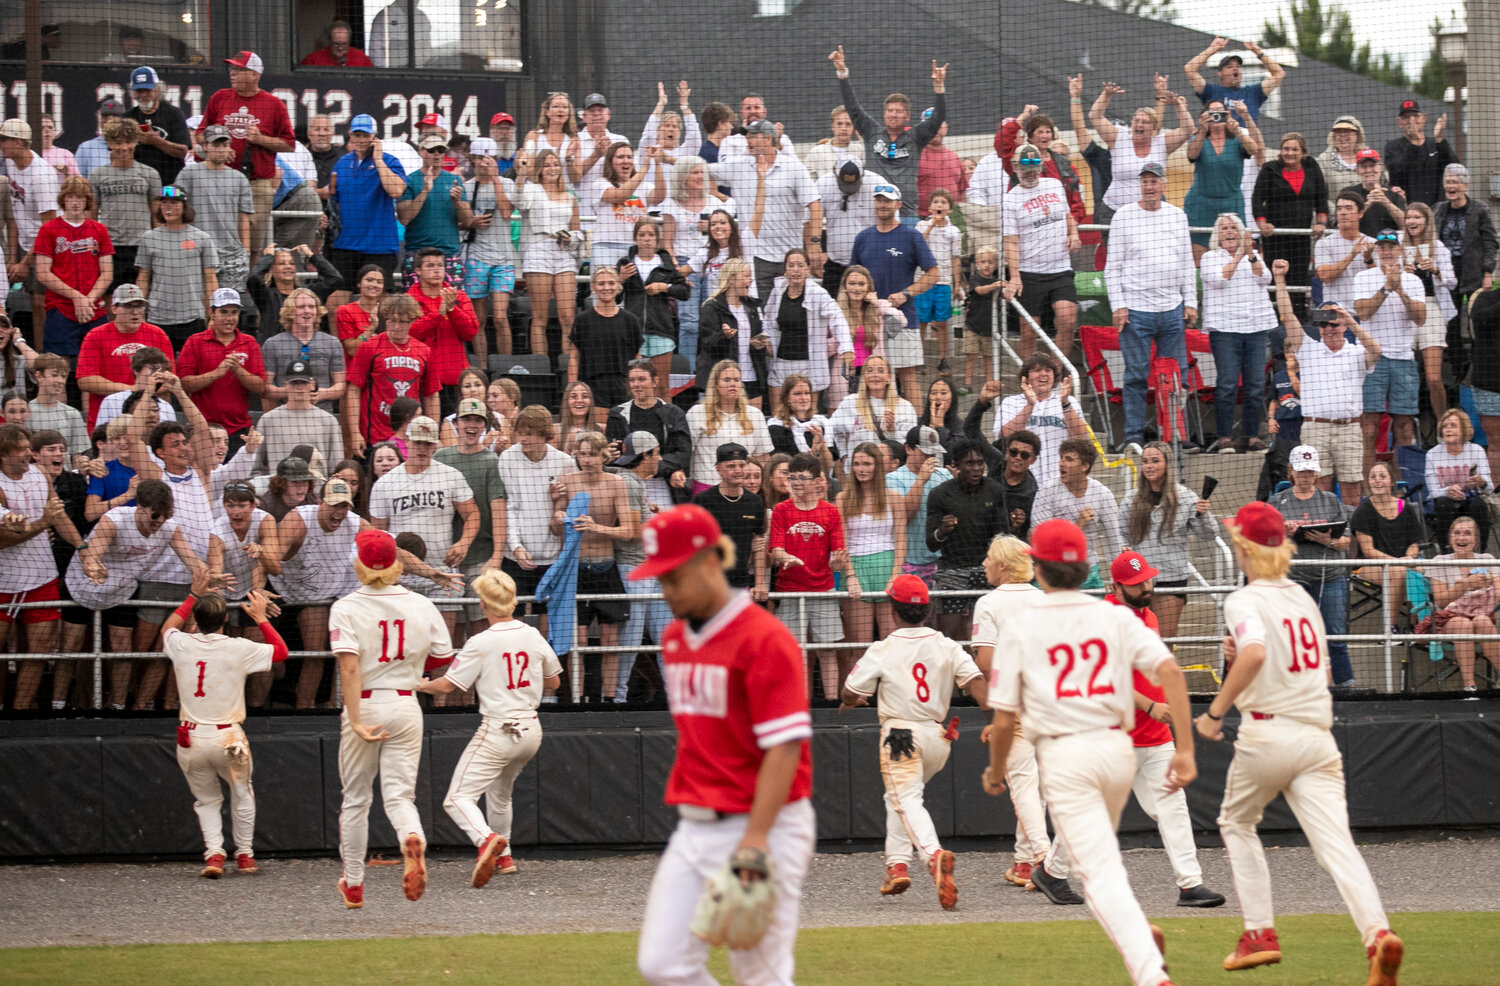 The Spanish Fort Toros race to celebrate with their student section following the 12-11, walk-off win over Saraland Saturday, May 6, on the Hill. Brayden Cooper came through with the hit that scored Newton Gardner in the eighth inning of Game 3 in the AHSAA state quarterfinal series.